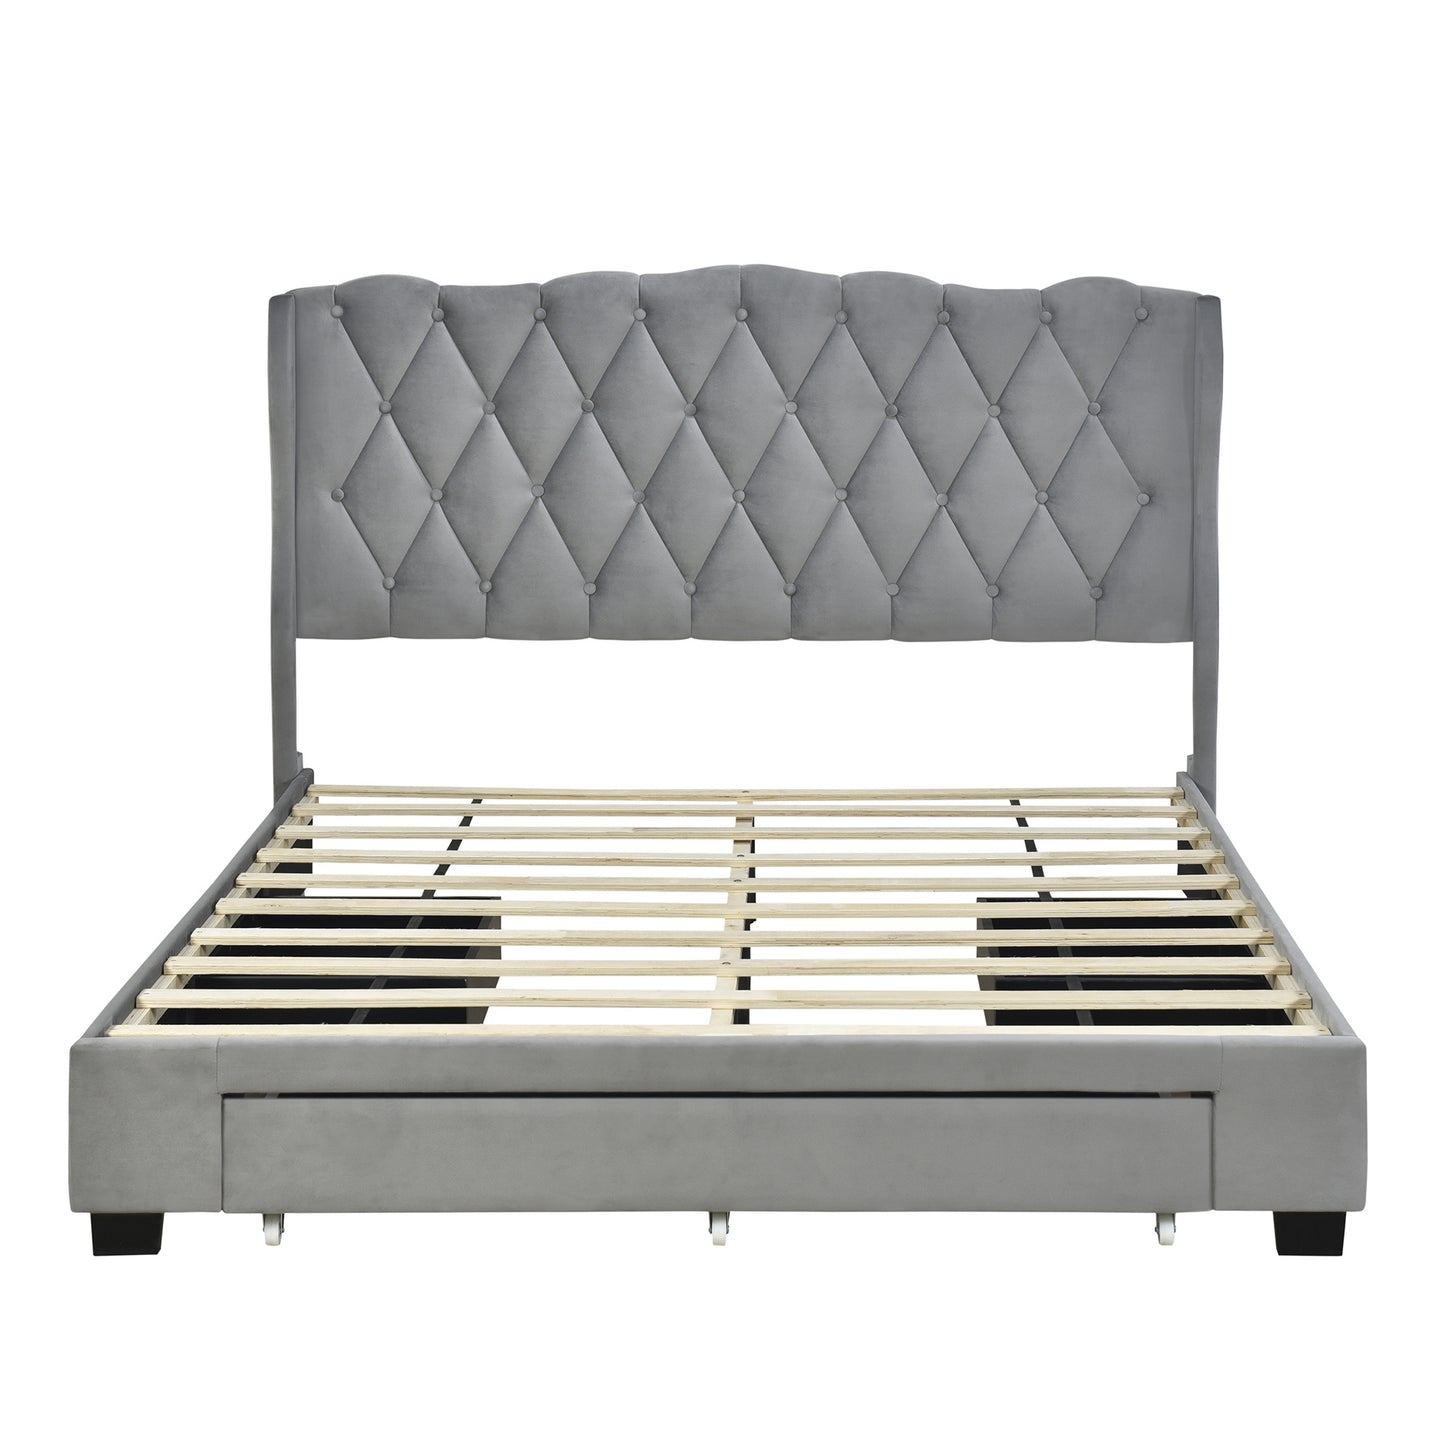 velvet upholstered platform bed with tufted headboard and 3 drawers, gray